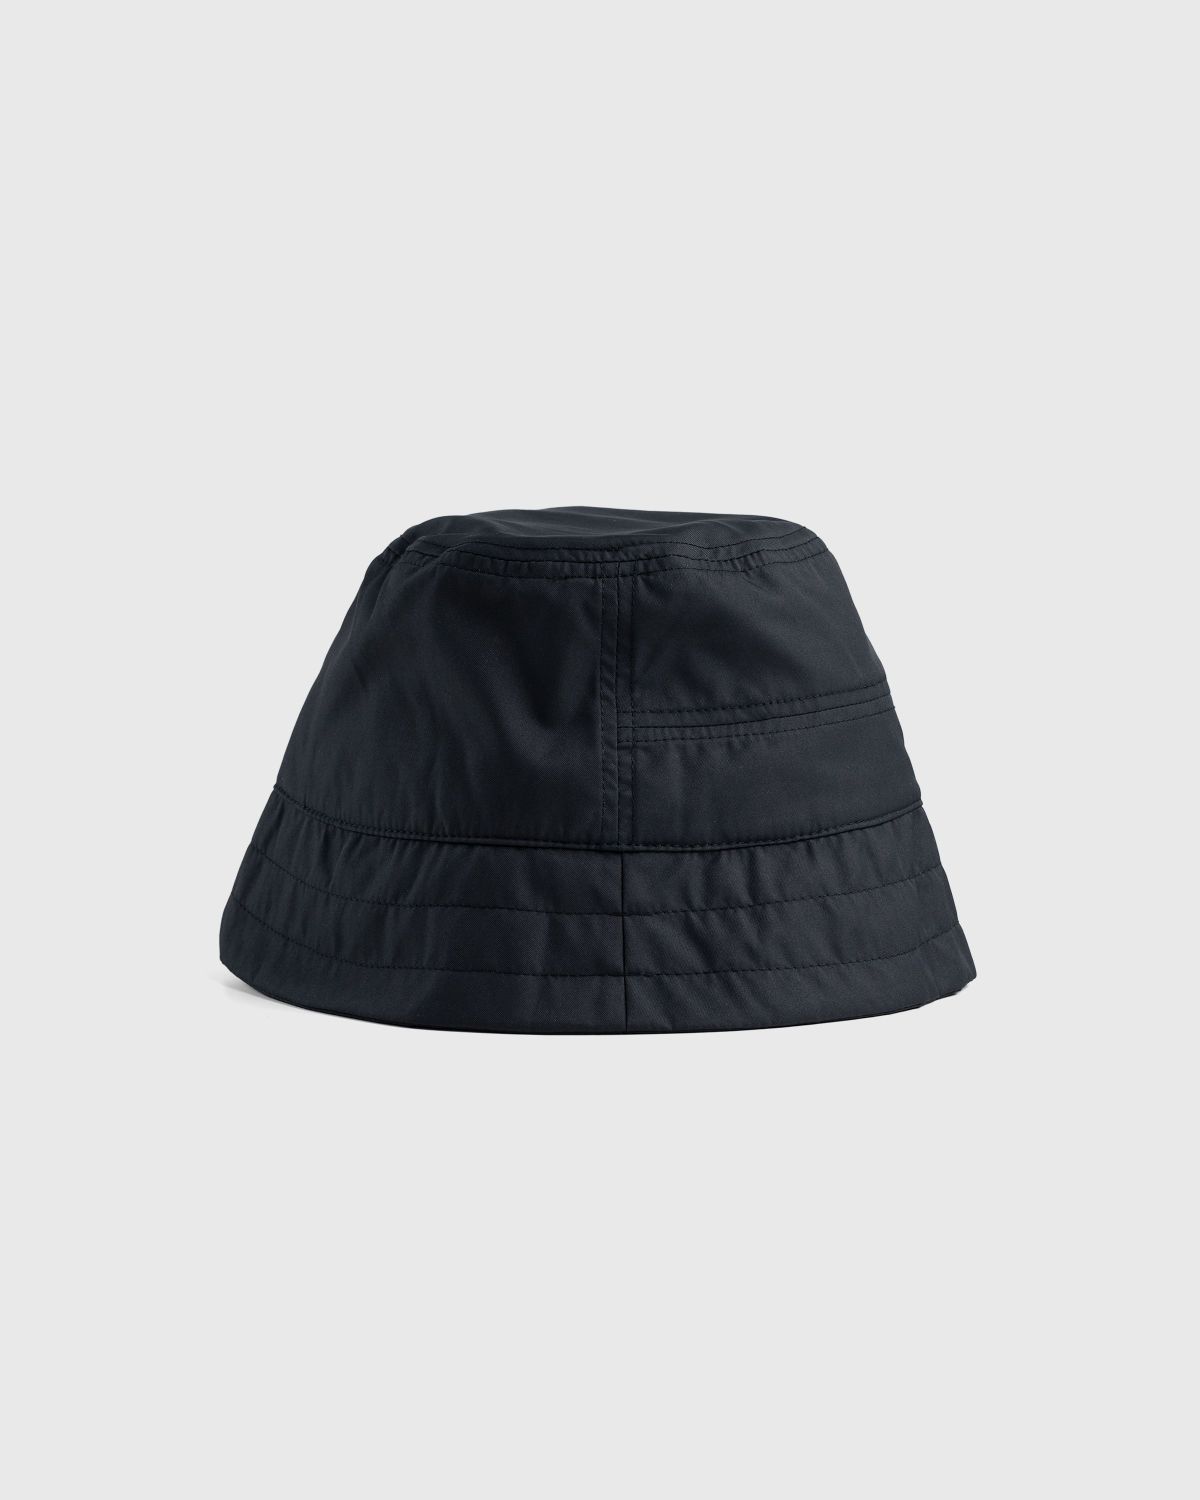 A-Cold-Wall* – Essential Bucket Hat Black - Bucket Hats - Black - Image 2